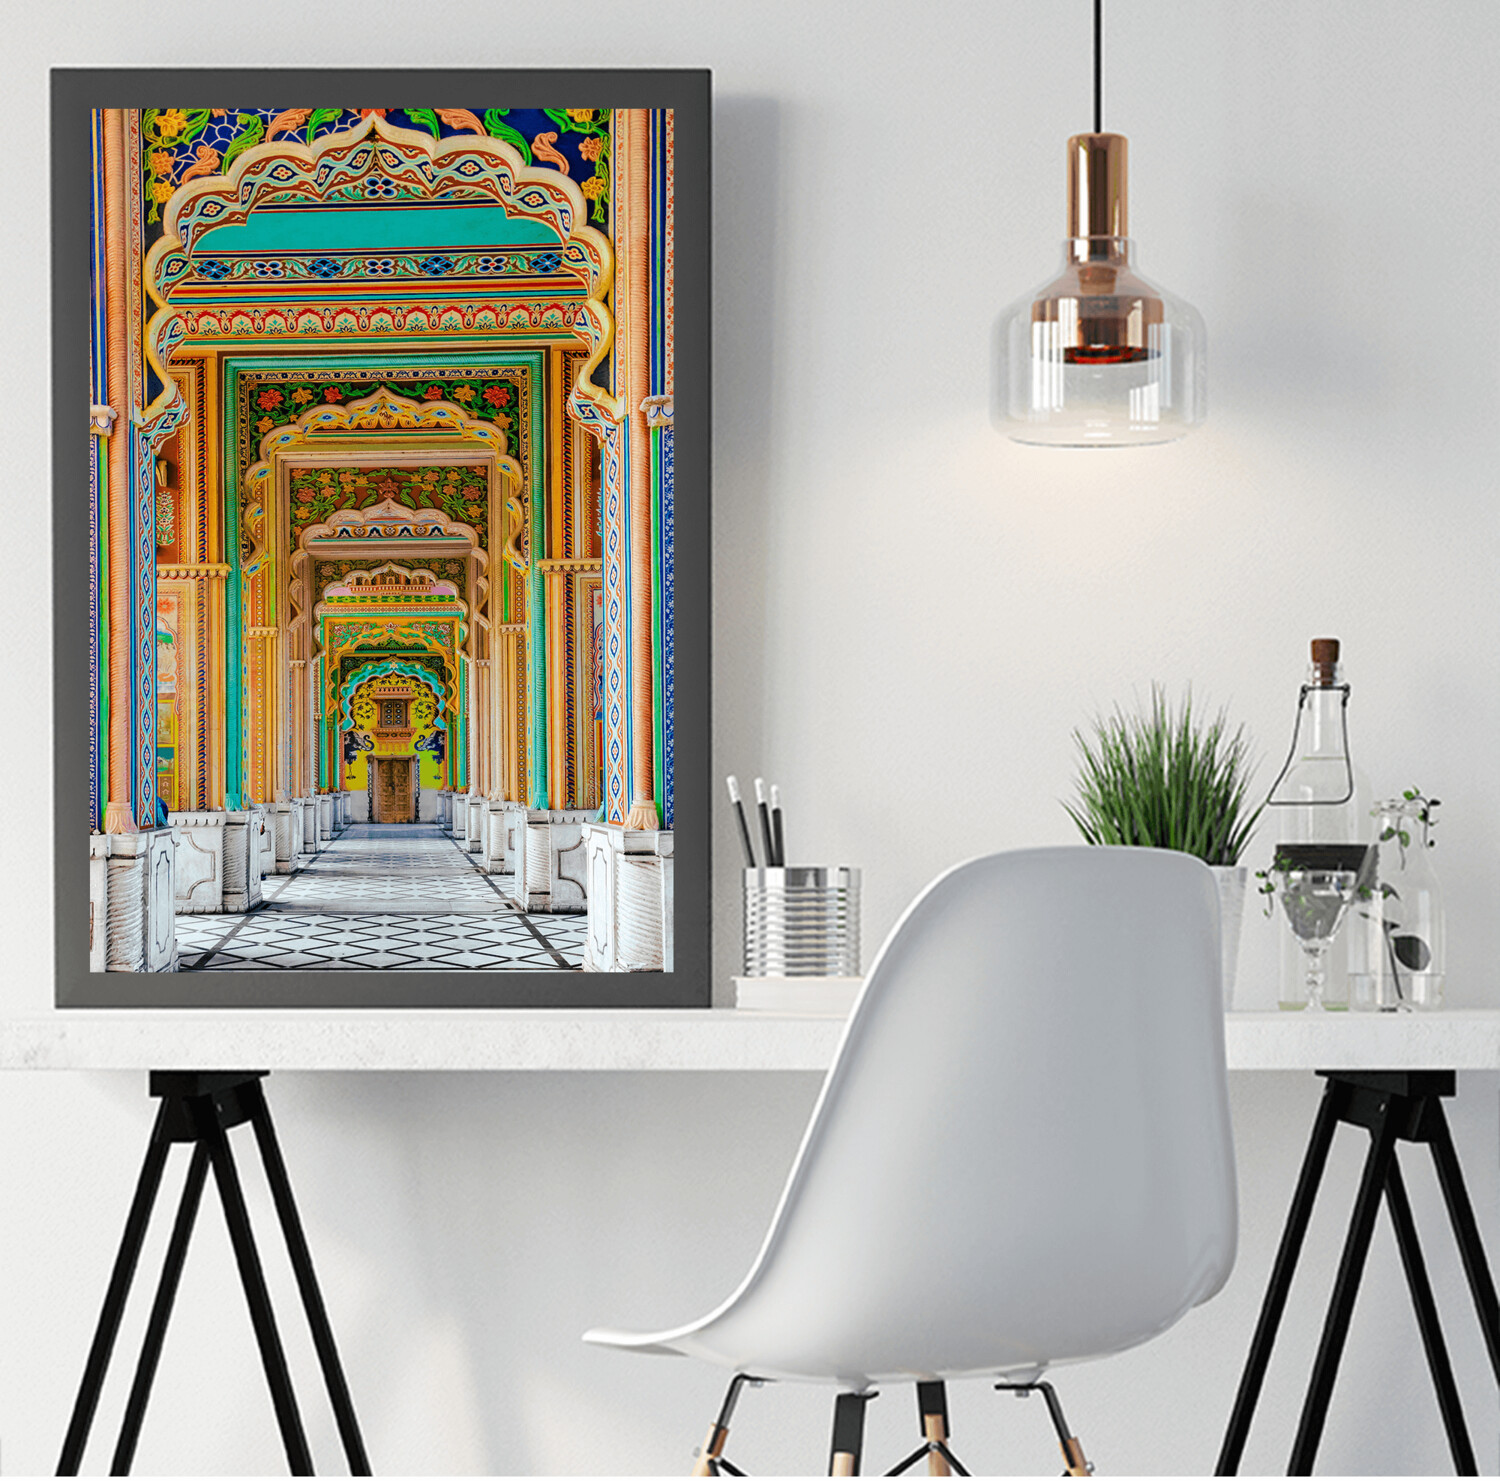 Wall Decor with Photo Frame / Unframed / on Paper Canvas, Royal Entrance Gate Jaipur, Size: Small 8 x 11 inch A4 Size, Medium: Fine Art Paper, No Frame or Framed: No Frame only Print